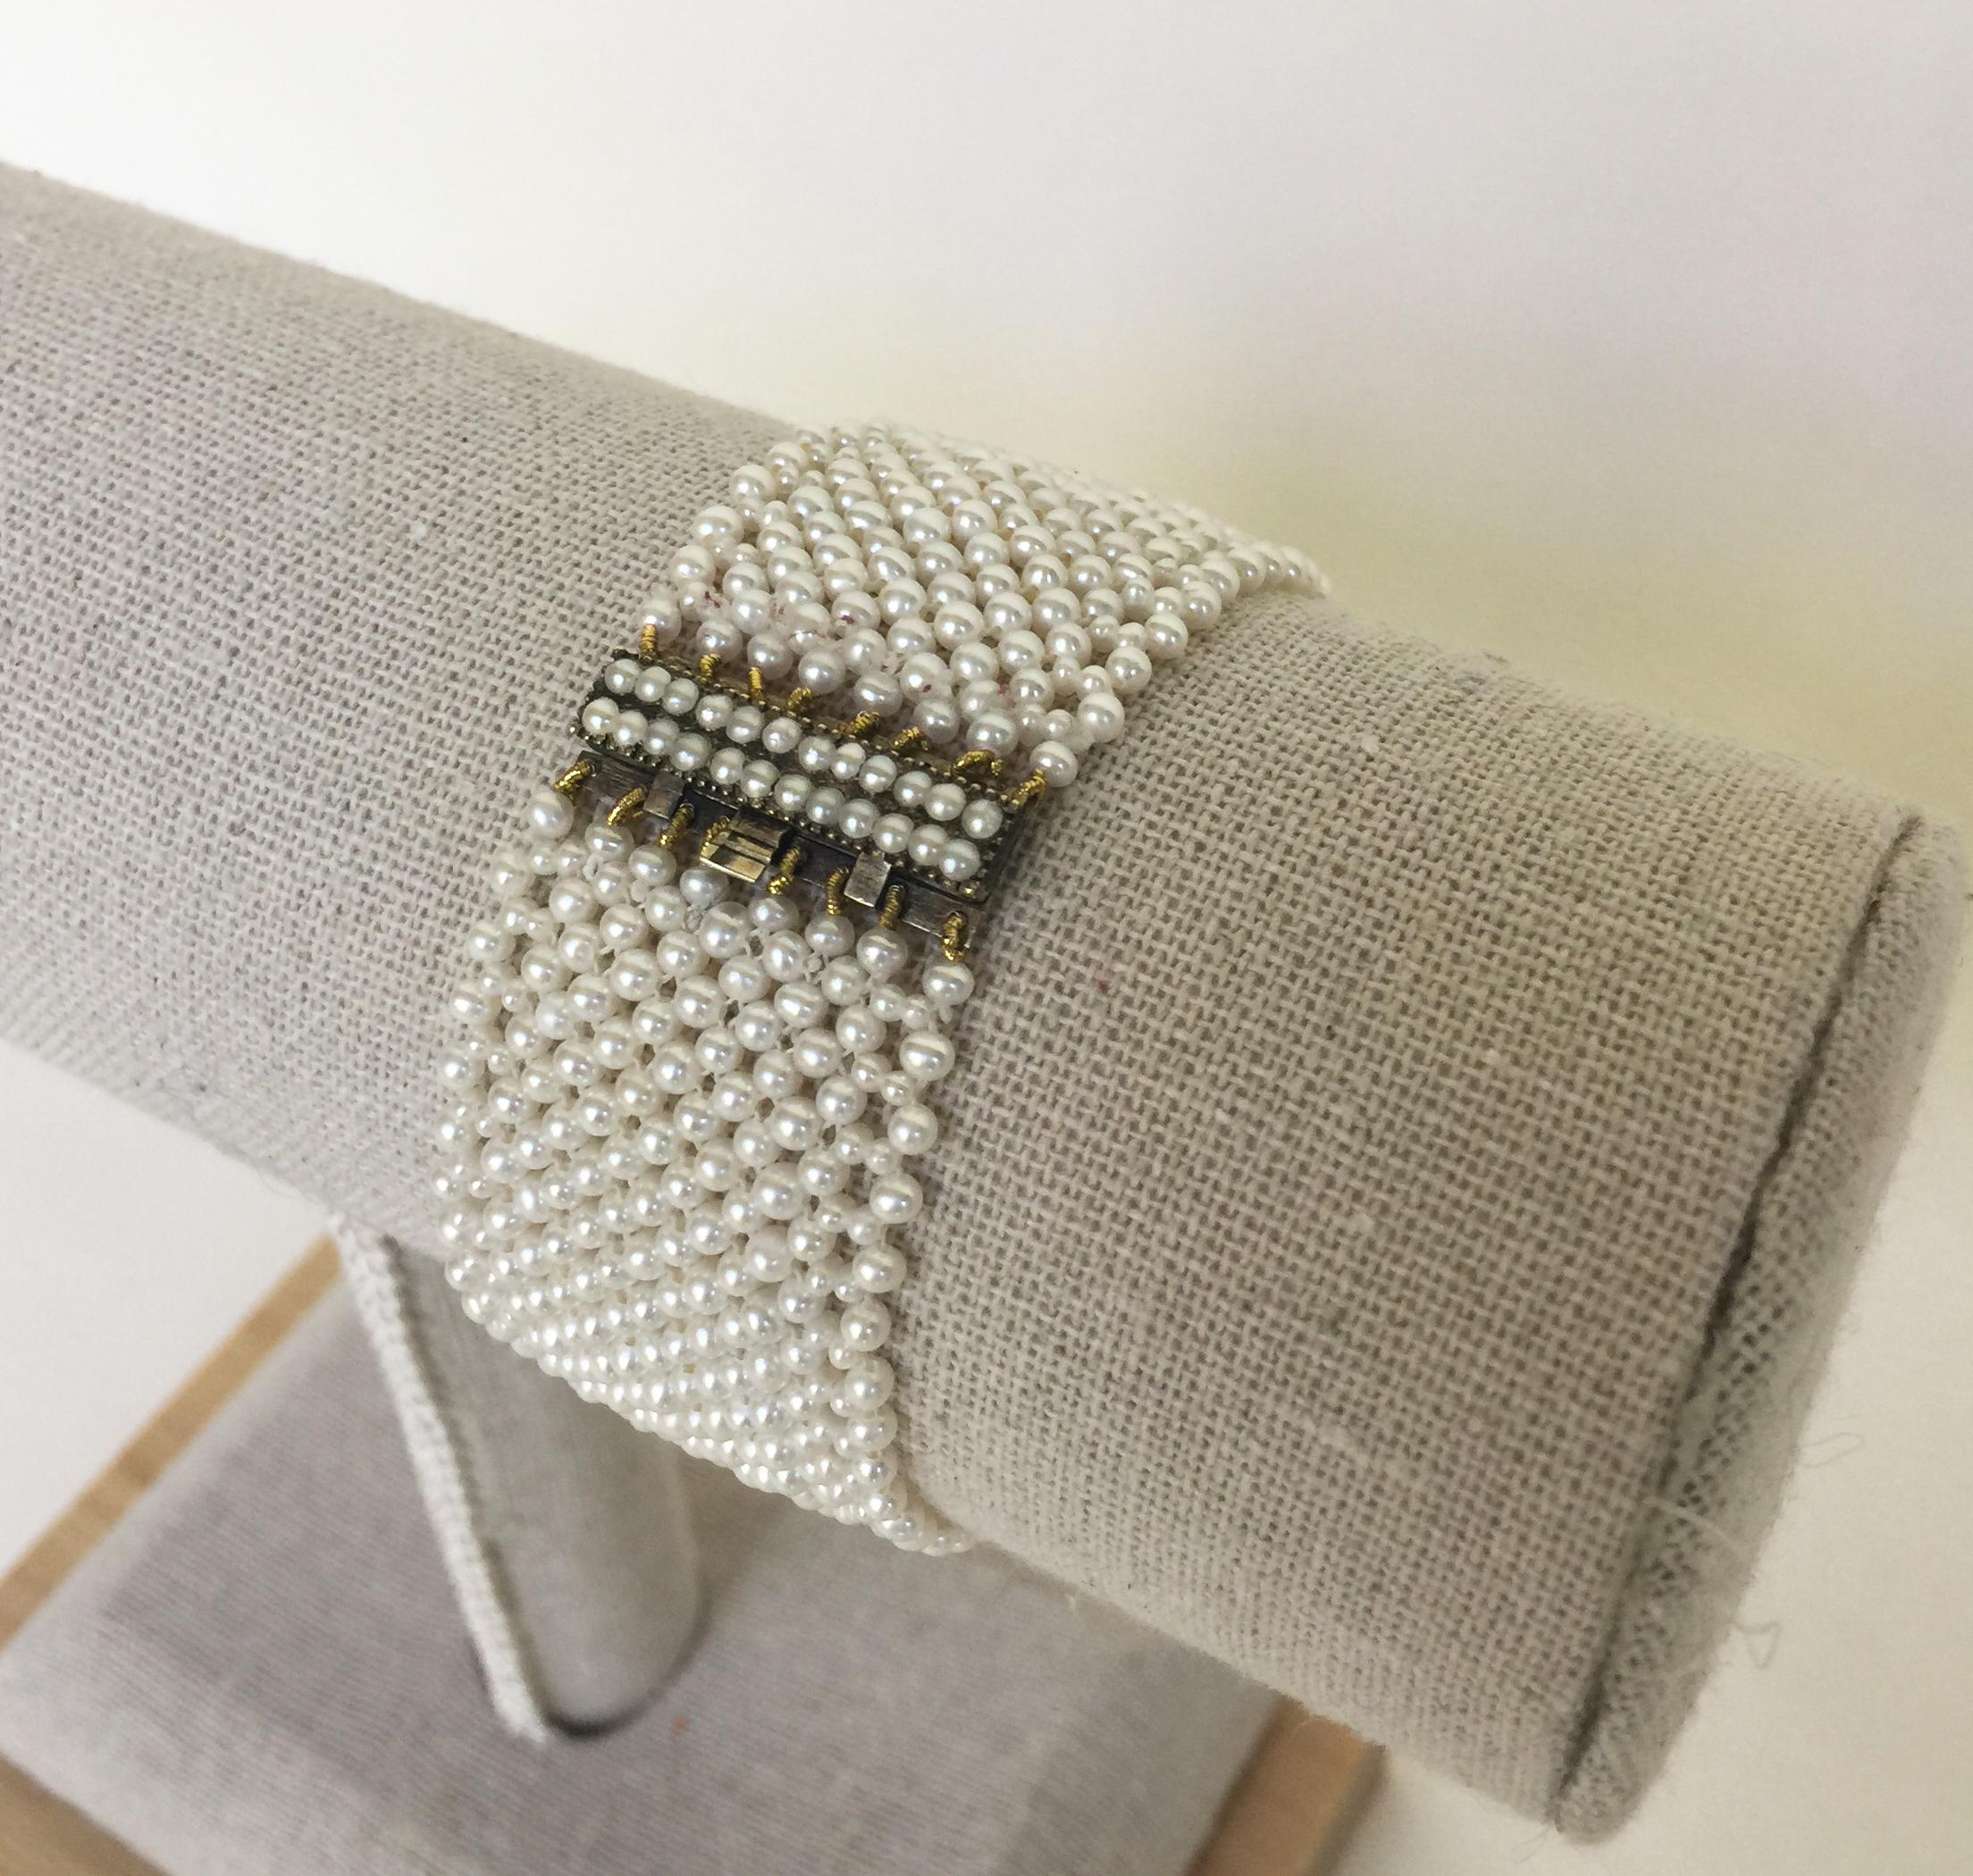 This woven white pearl bracelet with vintage clasp, original pearls, and 9k yellow gold is made with the finest pearls hand-selected by Marina J. The elegance of this bracelet is highlighted by the glowing white pearls intricately woven into a